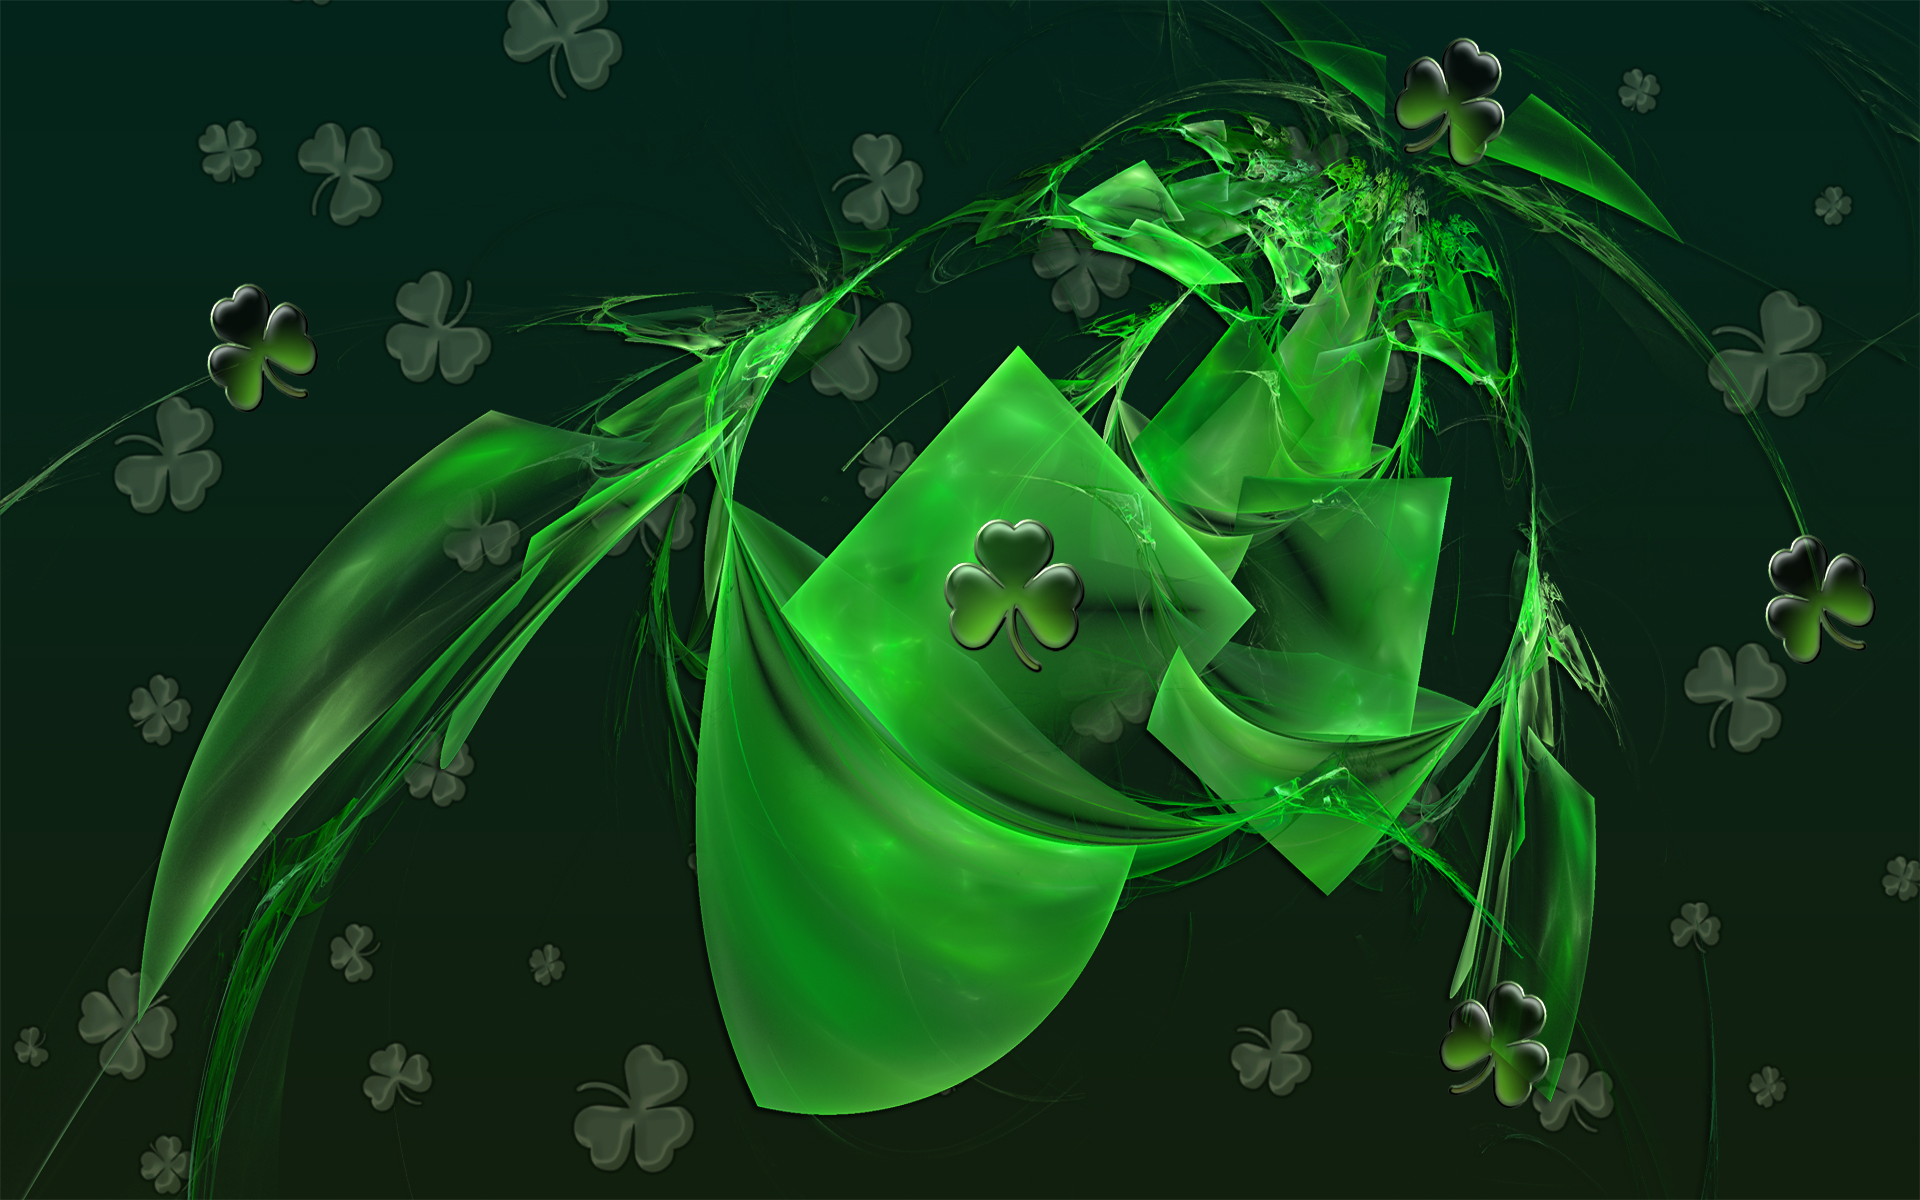 Hd Wallpapers St Patrick S Day 1024 X 768 83 Kb Jpeg HD Wallpapers